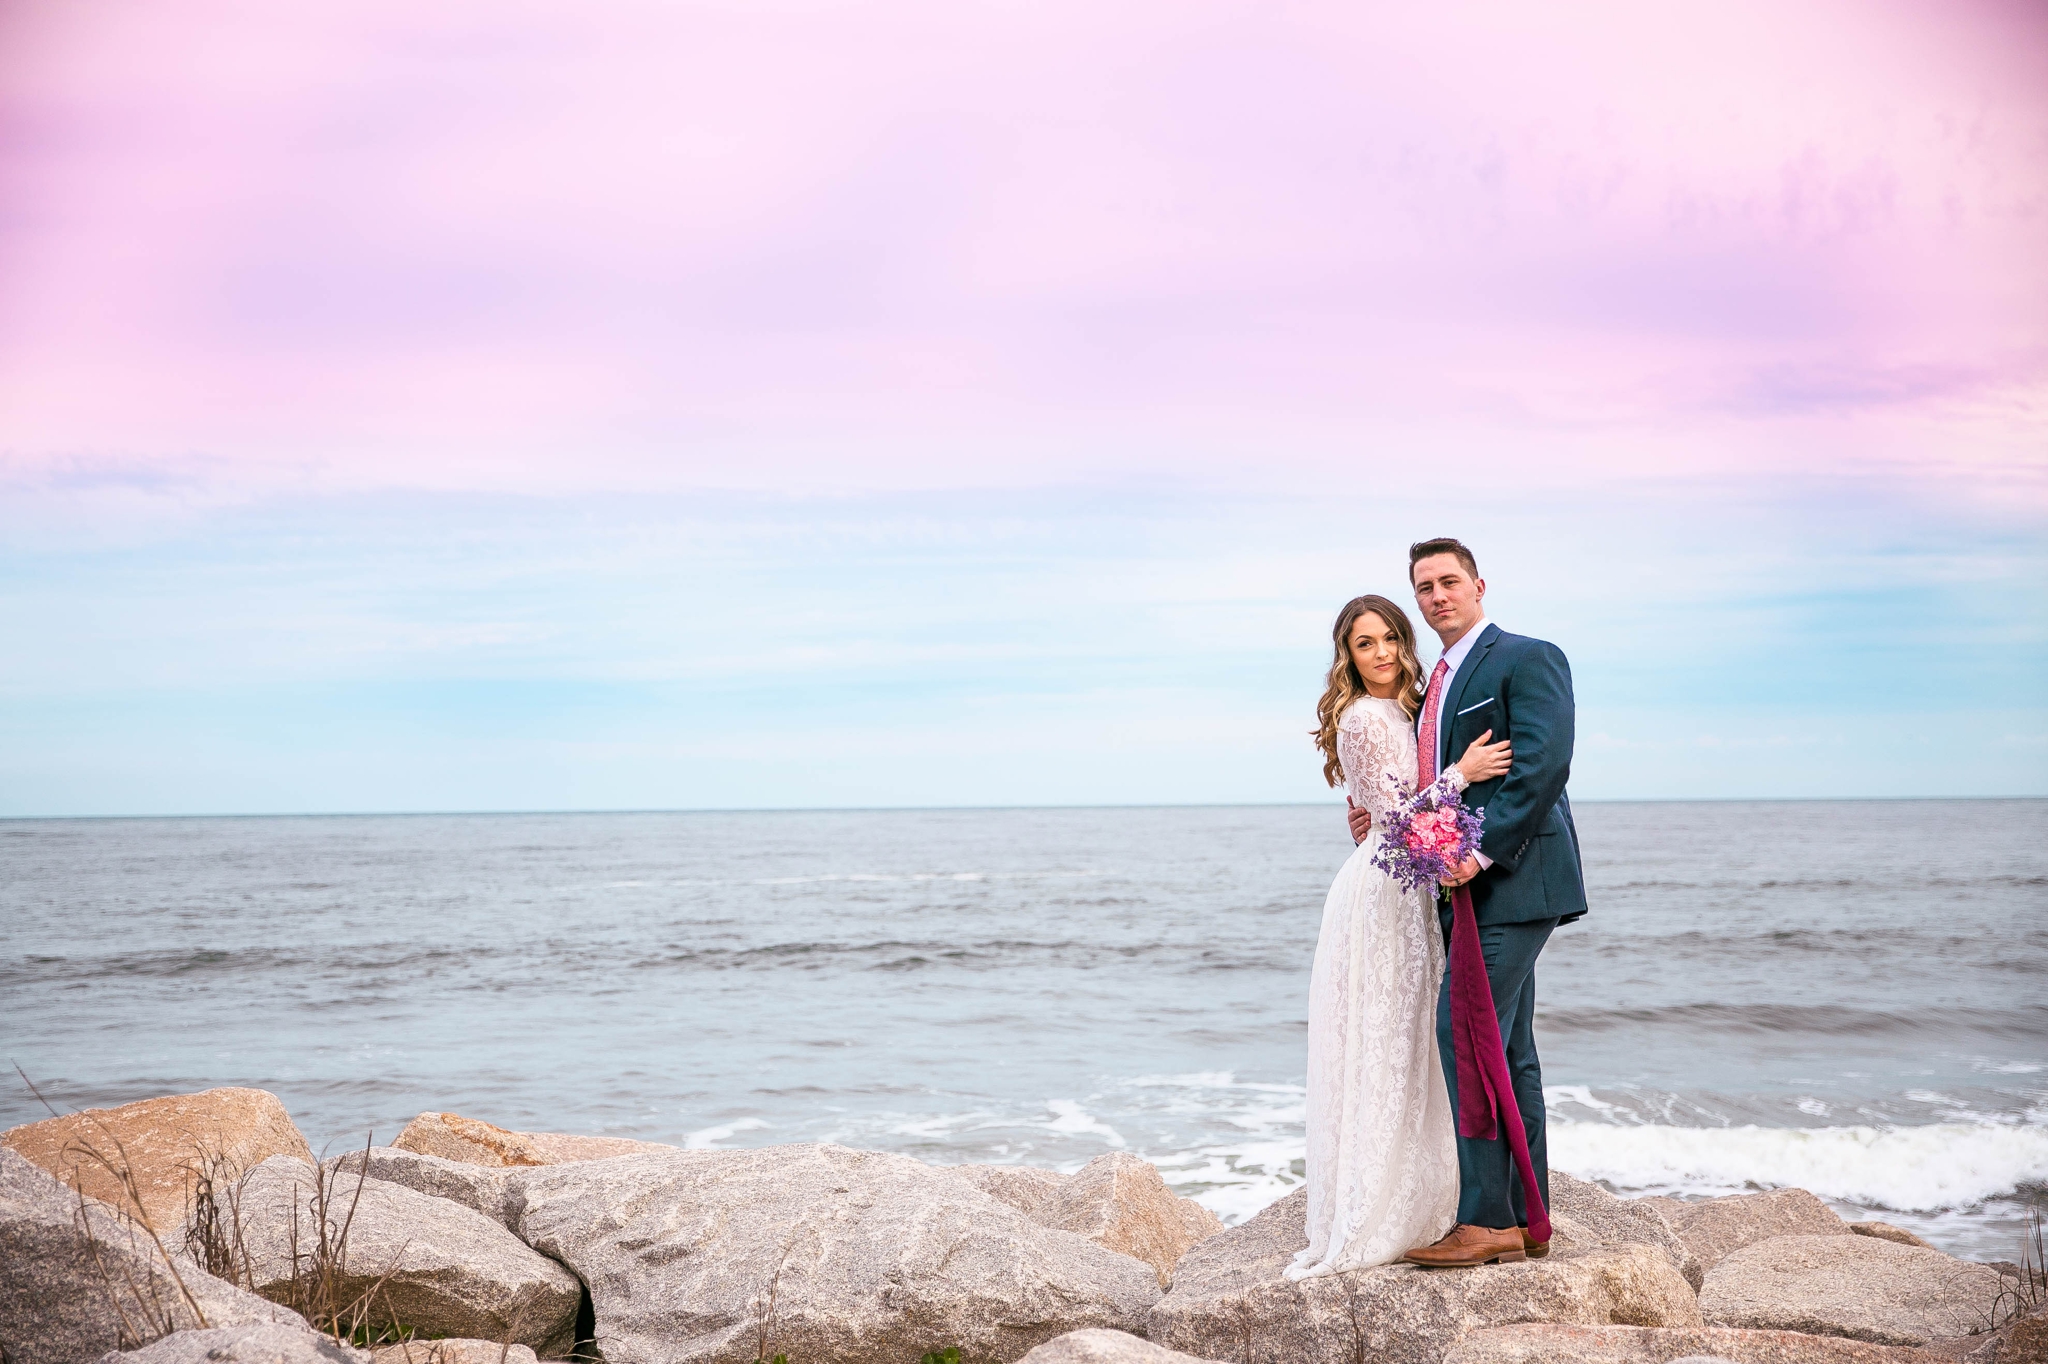 beach Elopement portraits on top of the cliffs - - dress by asos with purple and pink flowers and navy suit - oahu hawaii wedding photographer